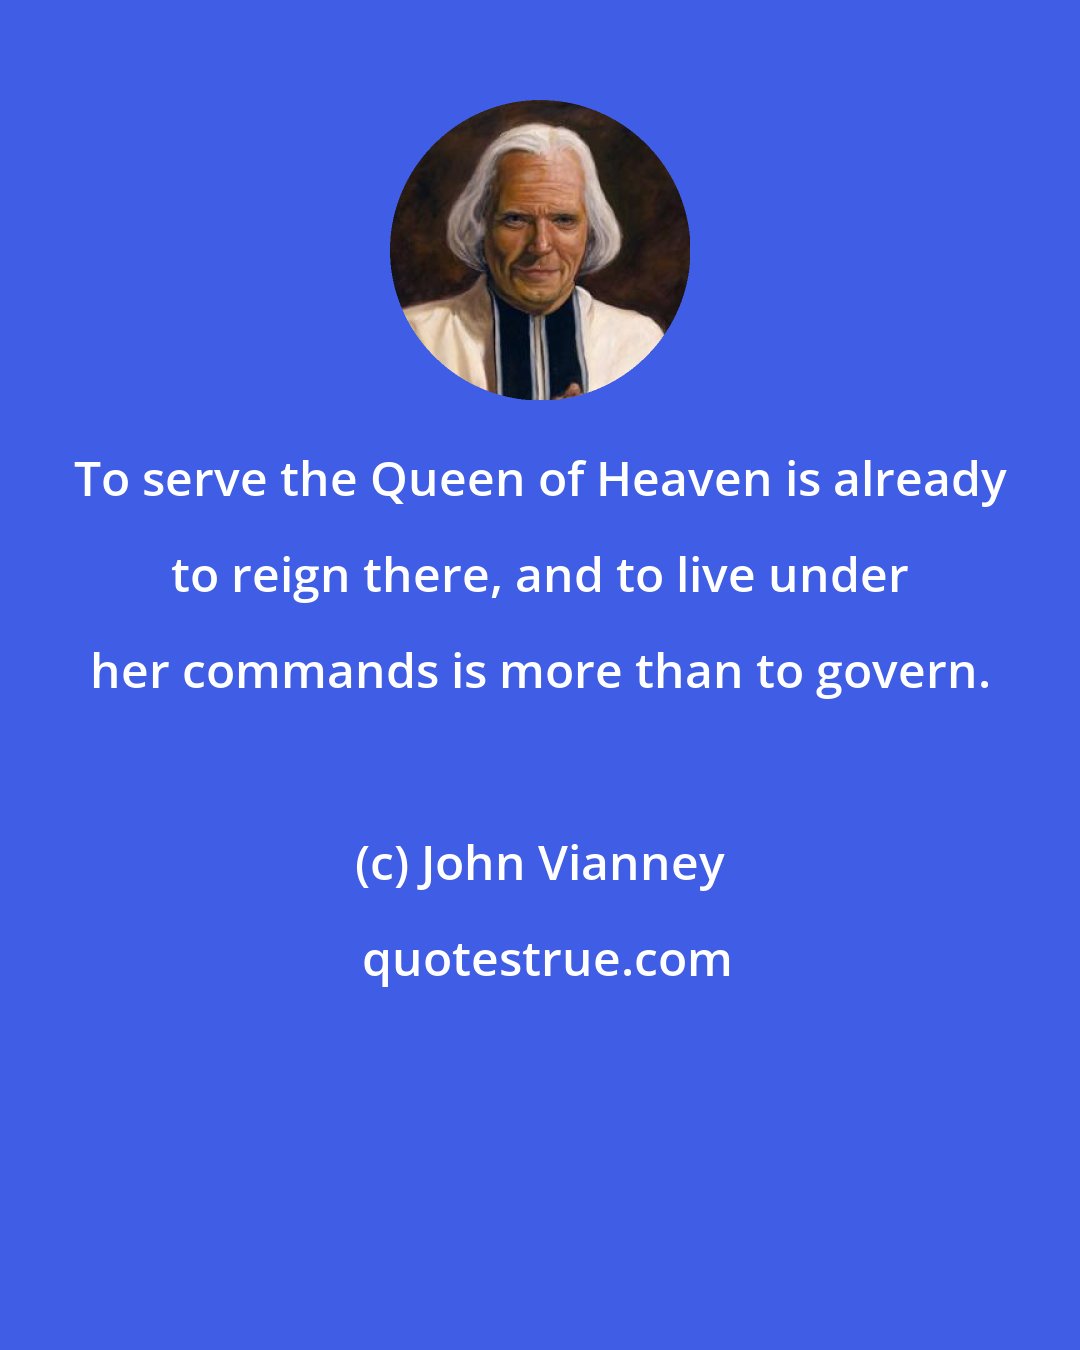 John Vianney: To serve the Queen of Heaven is already to reign there, and to live under her commands is more than to govern.